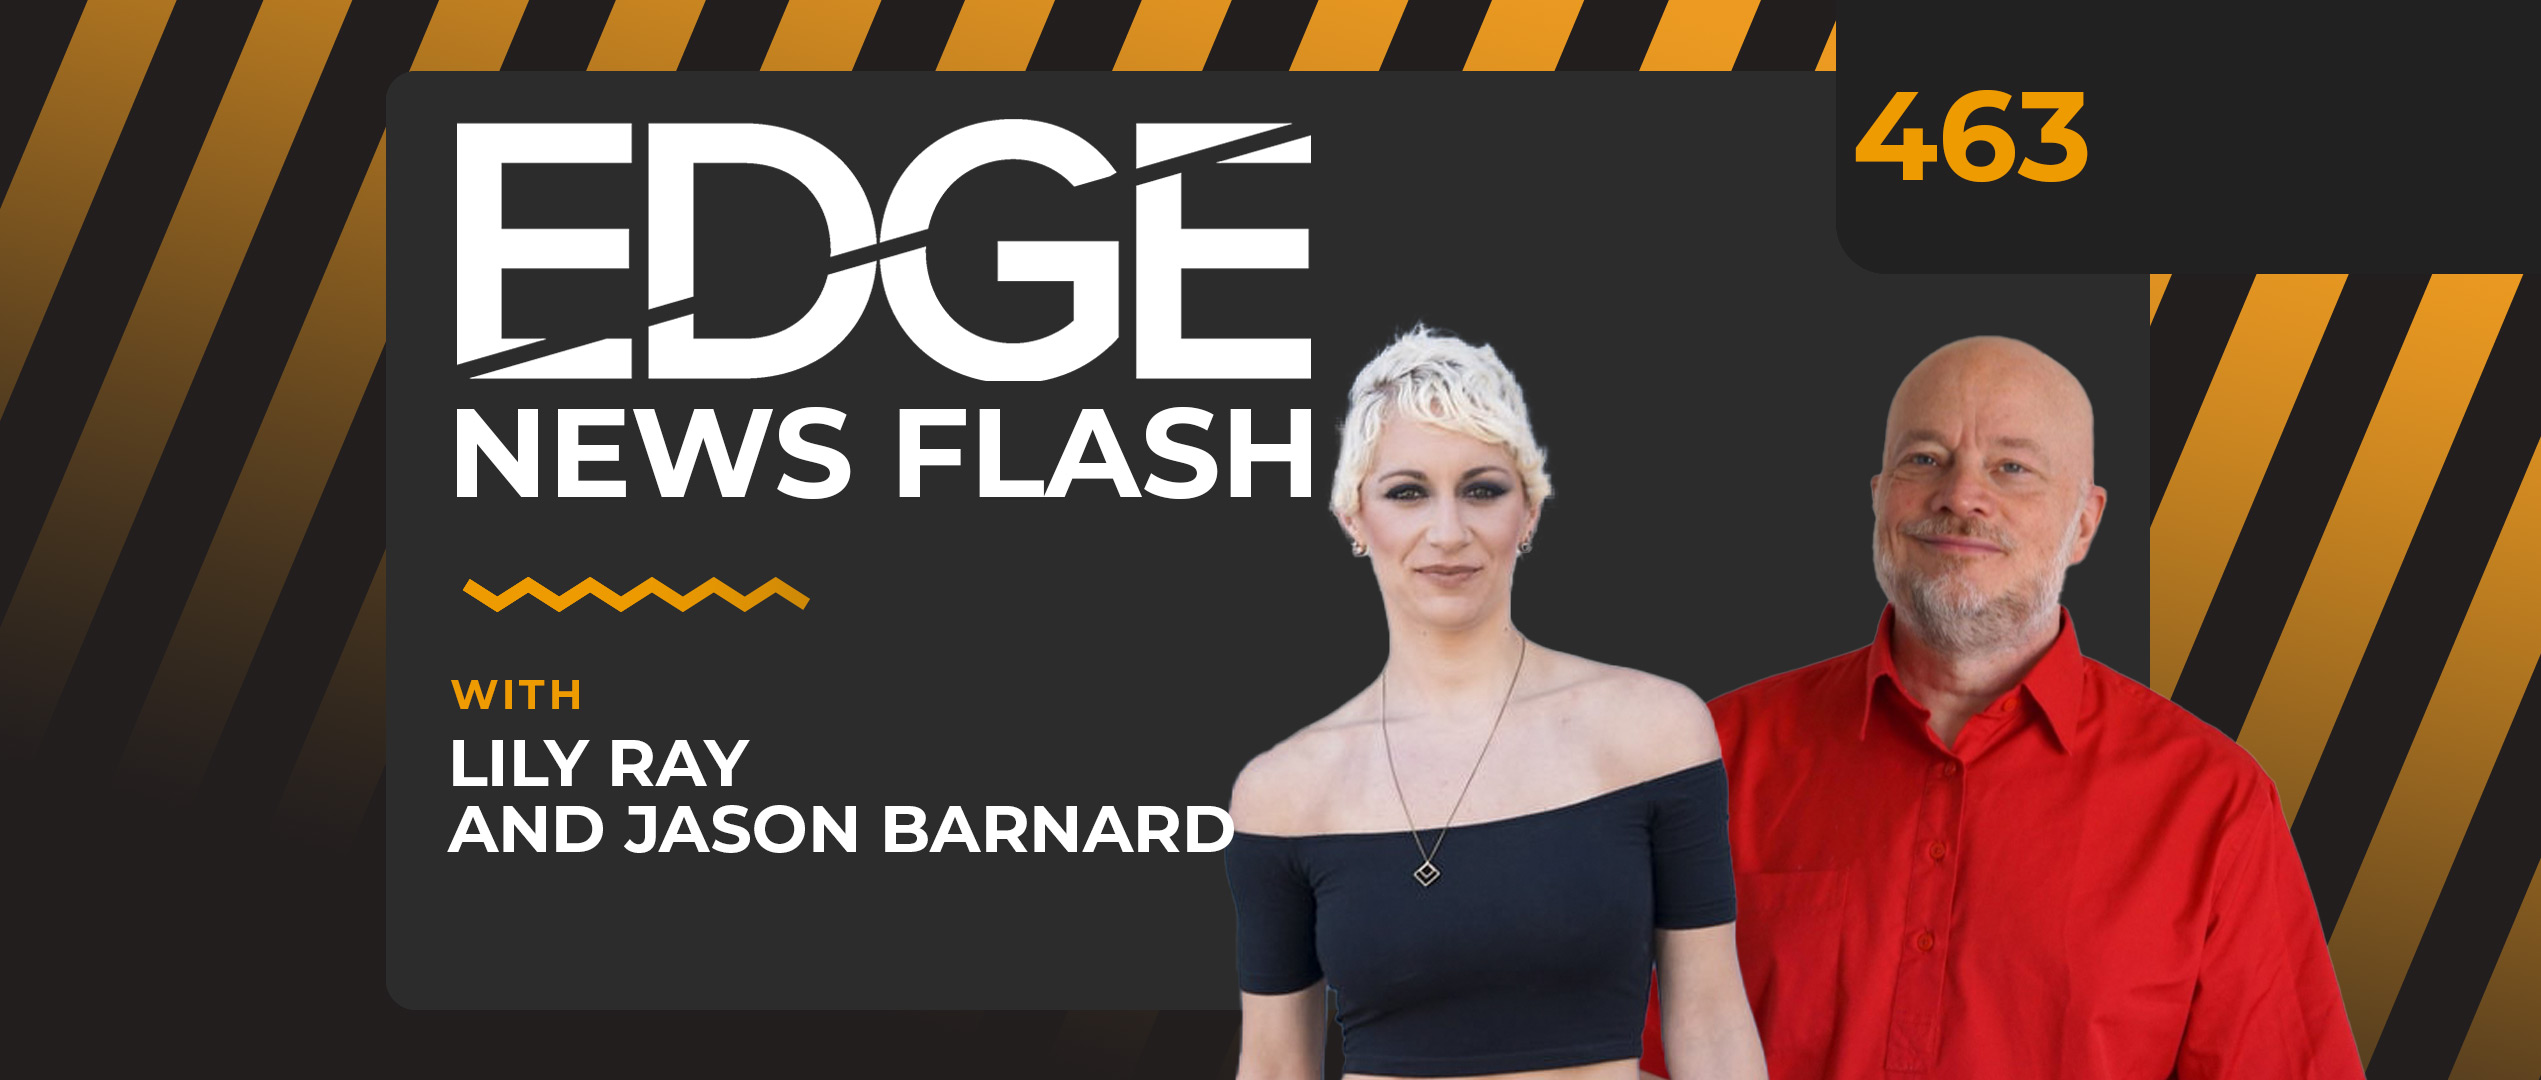 Title Graphic for Episdoe 463 - News Flash with Lily Ray and Jason Barnard